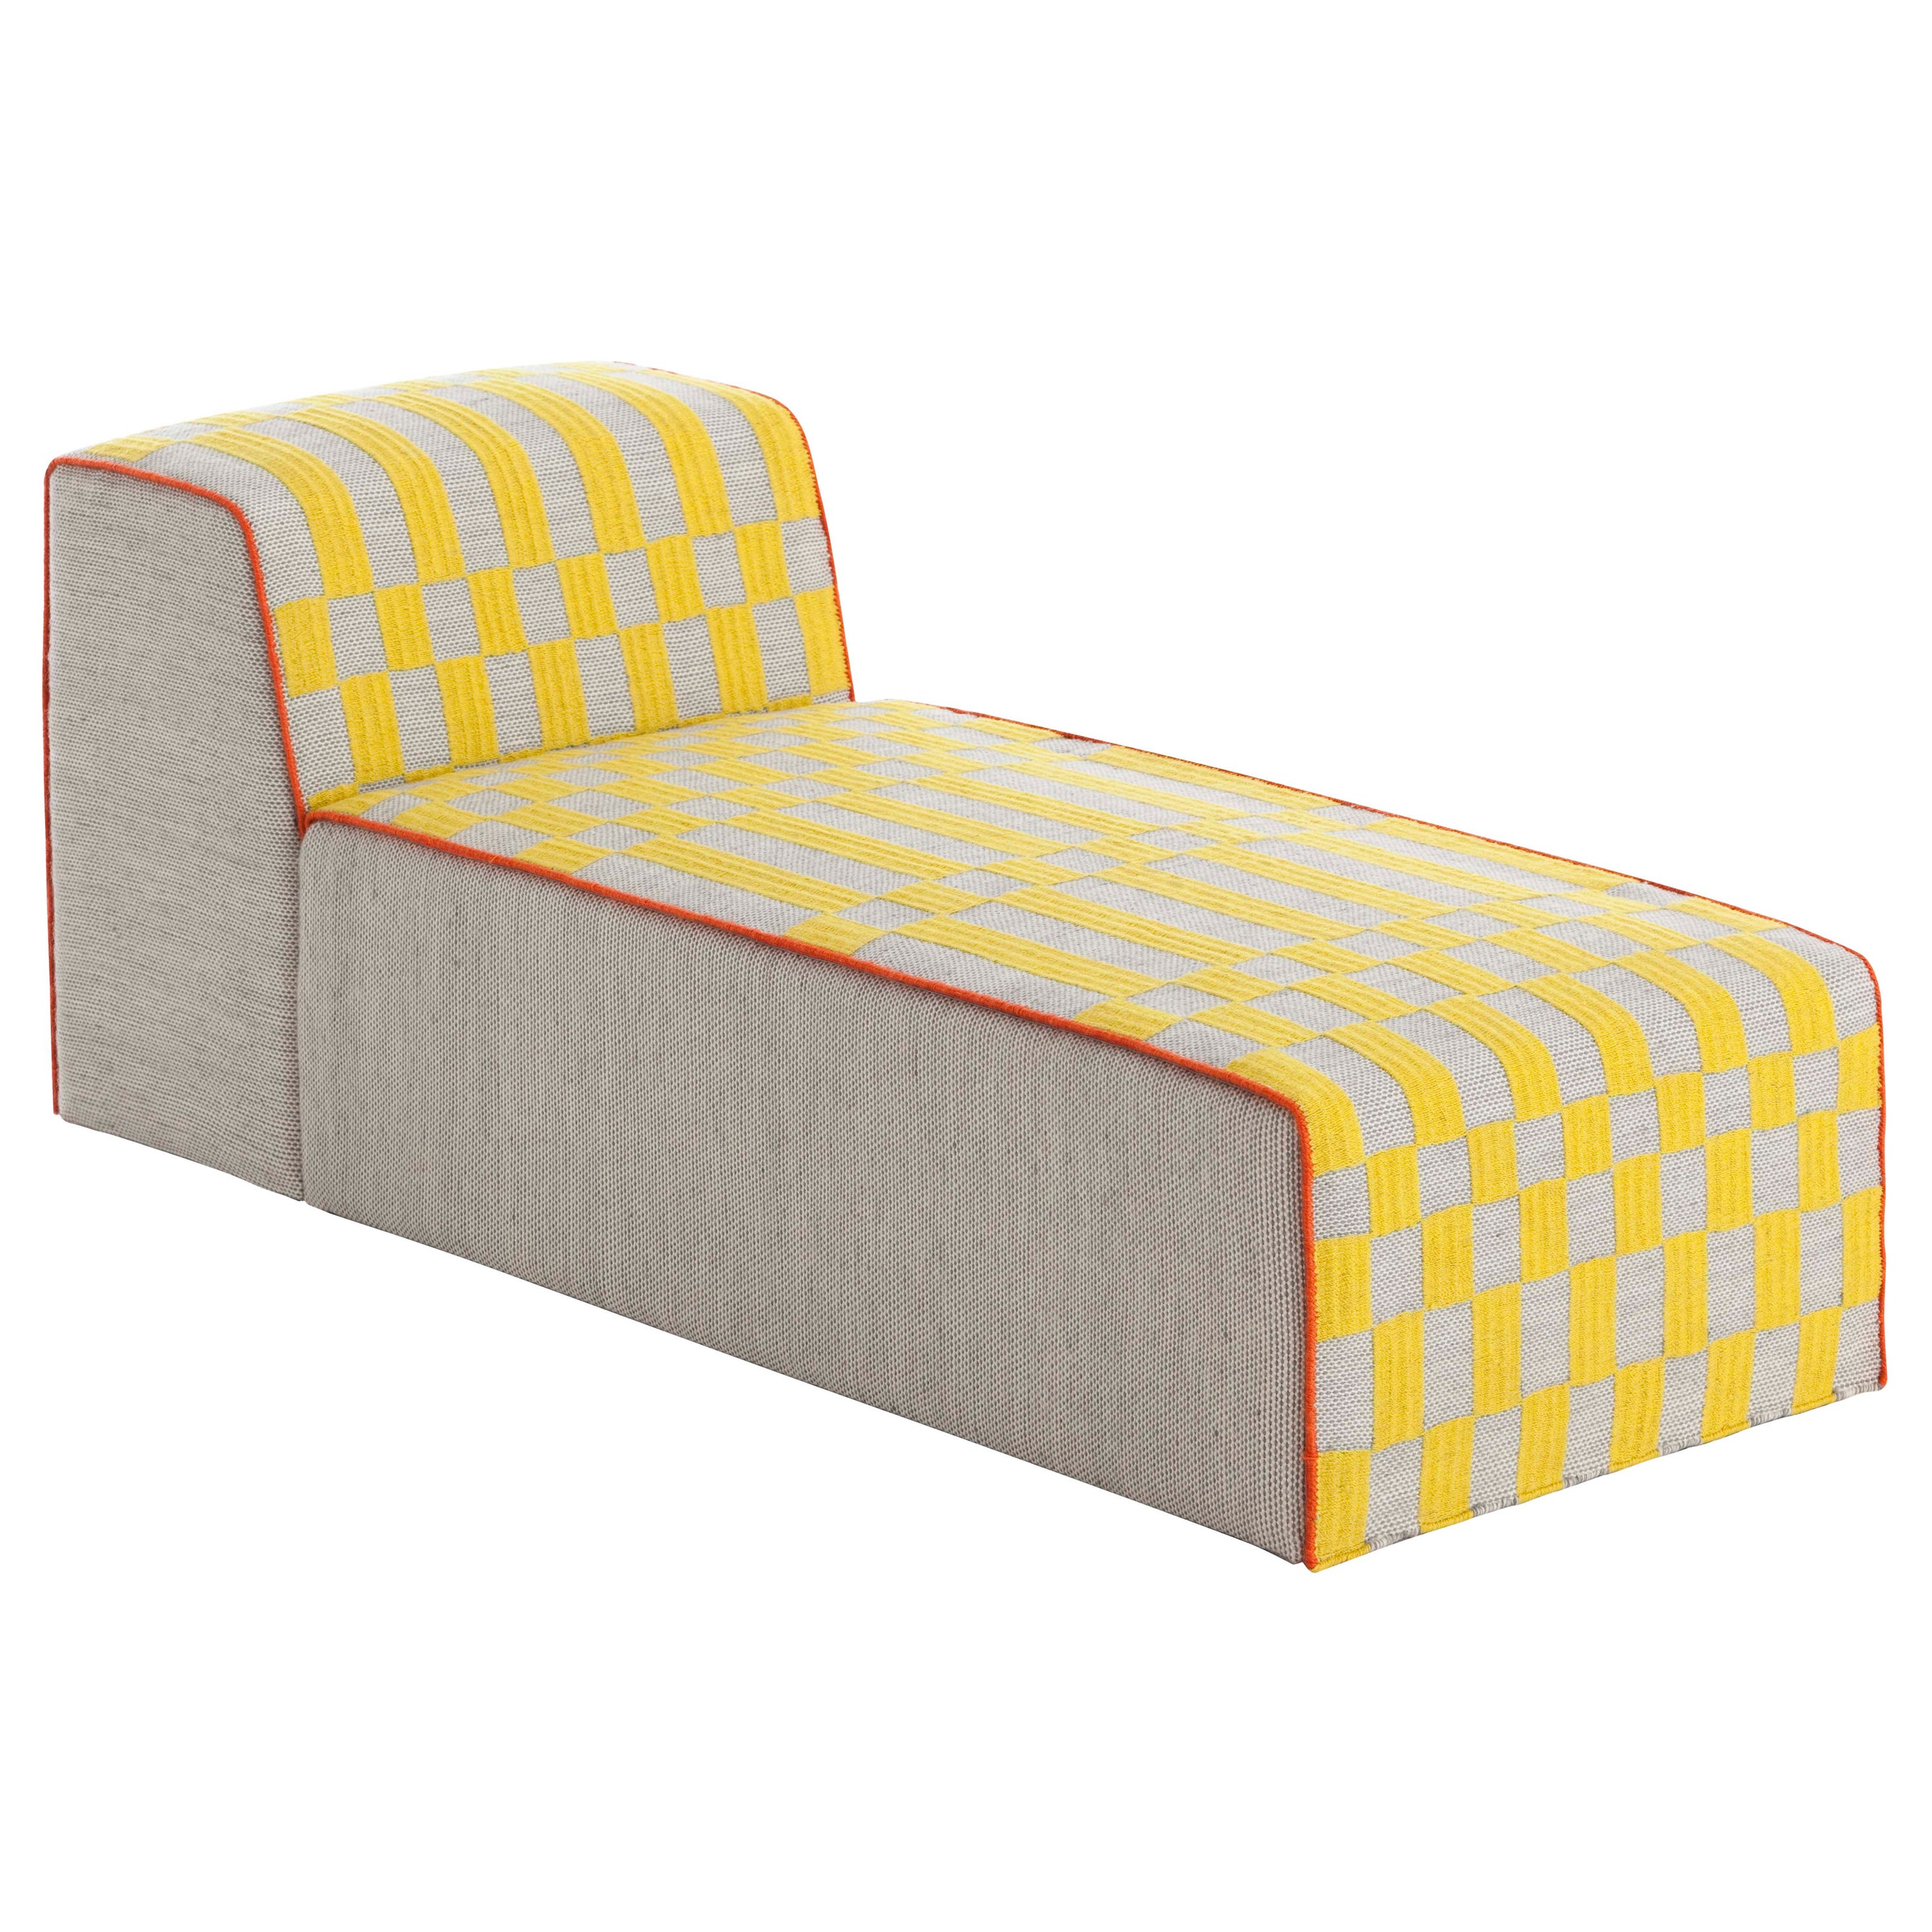 GAN Spaces Bandas Chaise Longue in B Yellow with Wood Frame by Patricia Urquiola For Sale